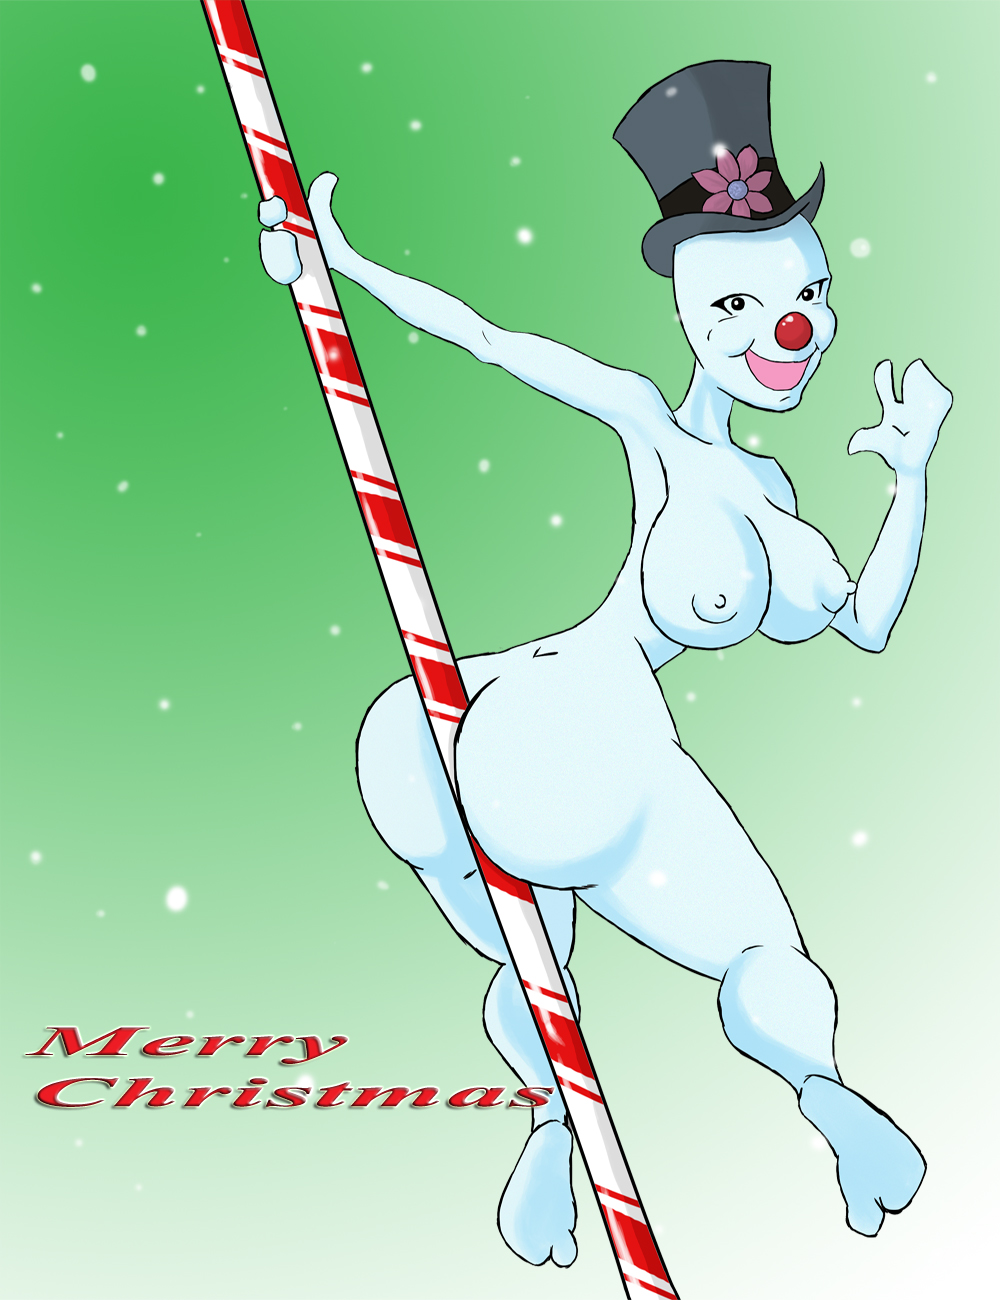 frosty_the_snowman rule_63 tagme.